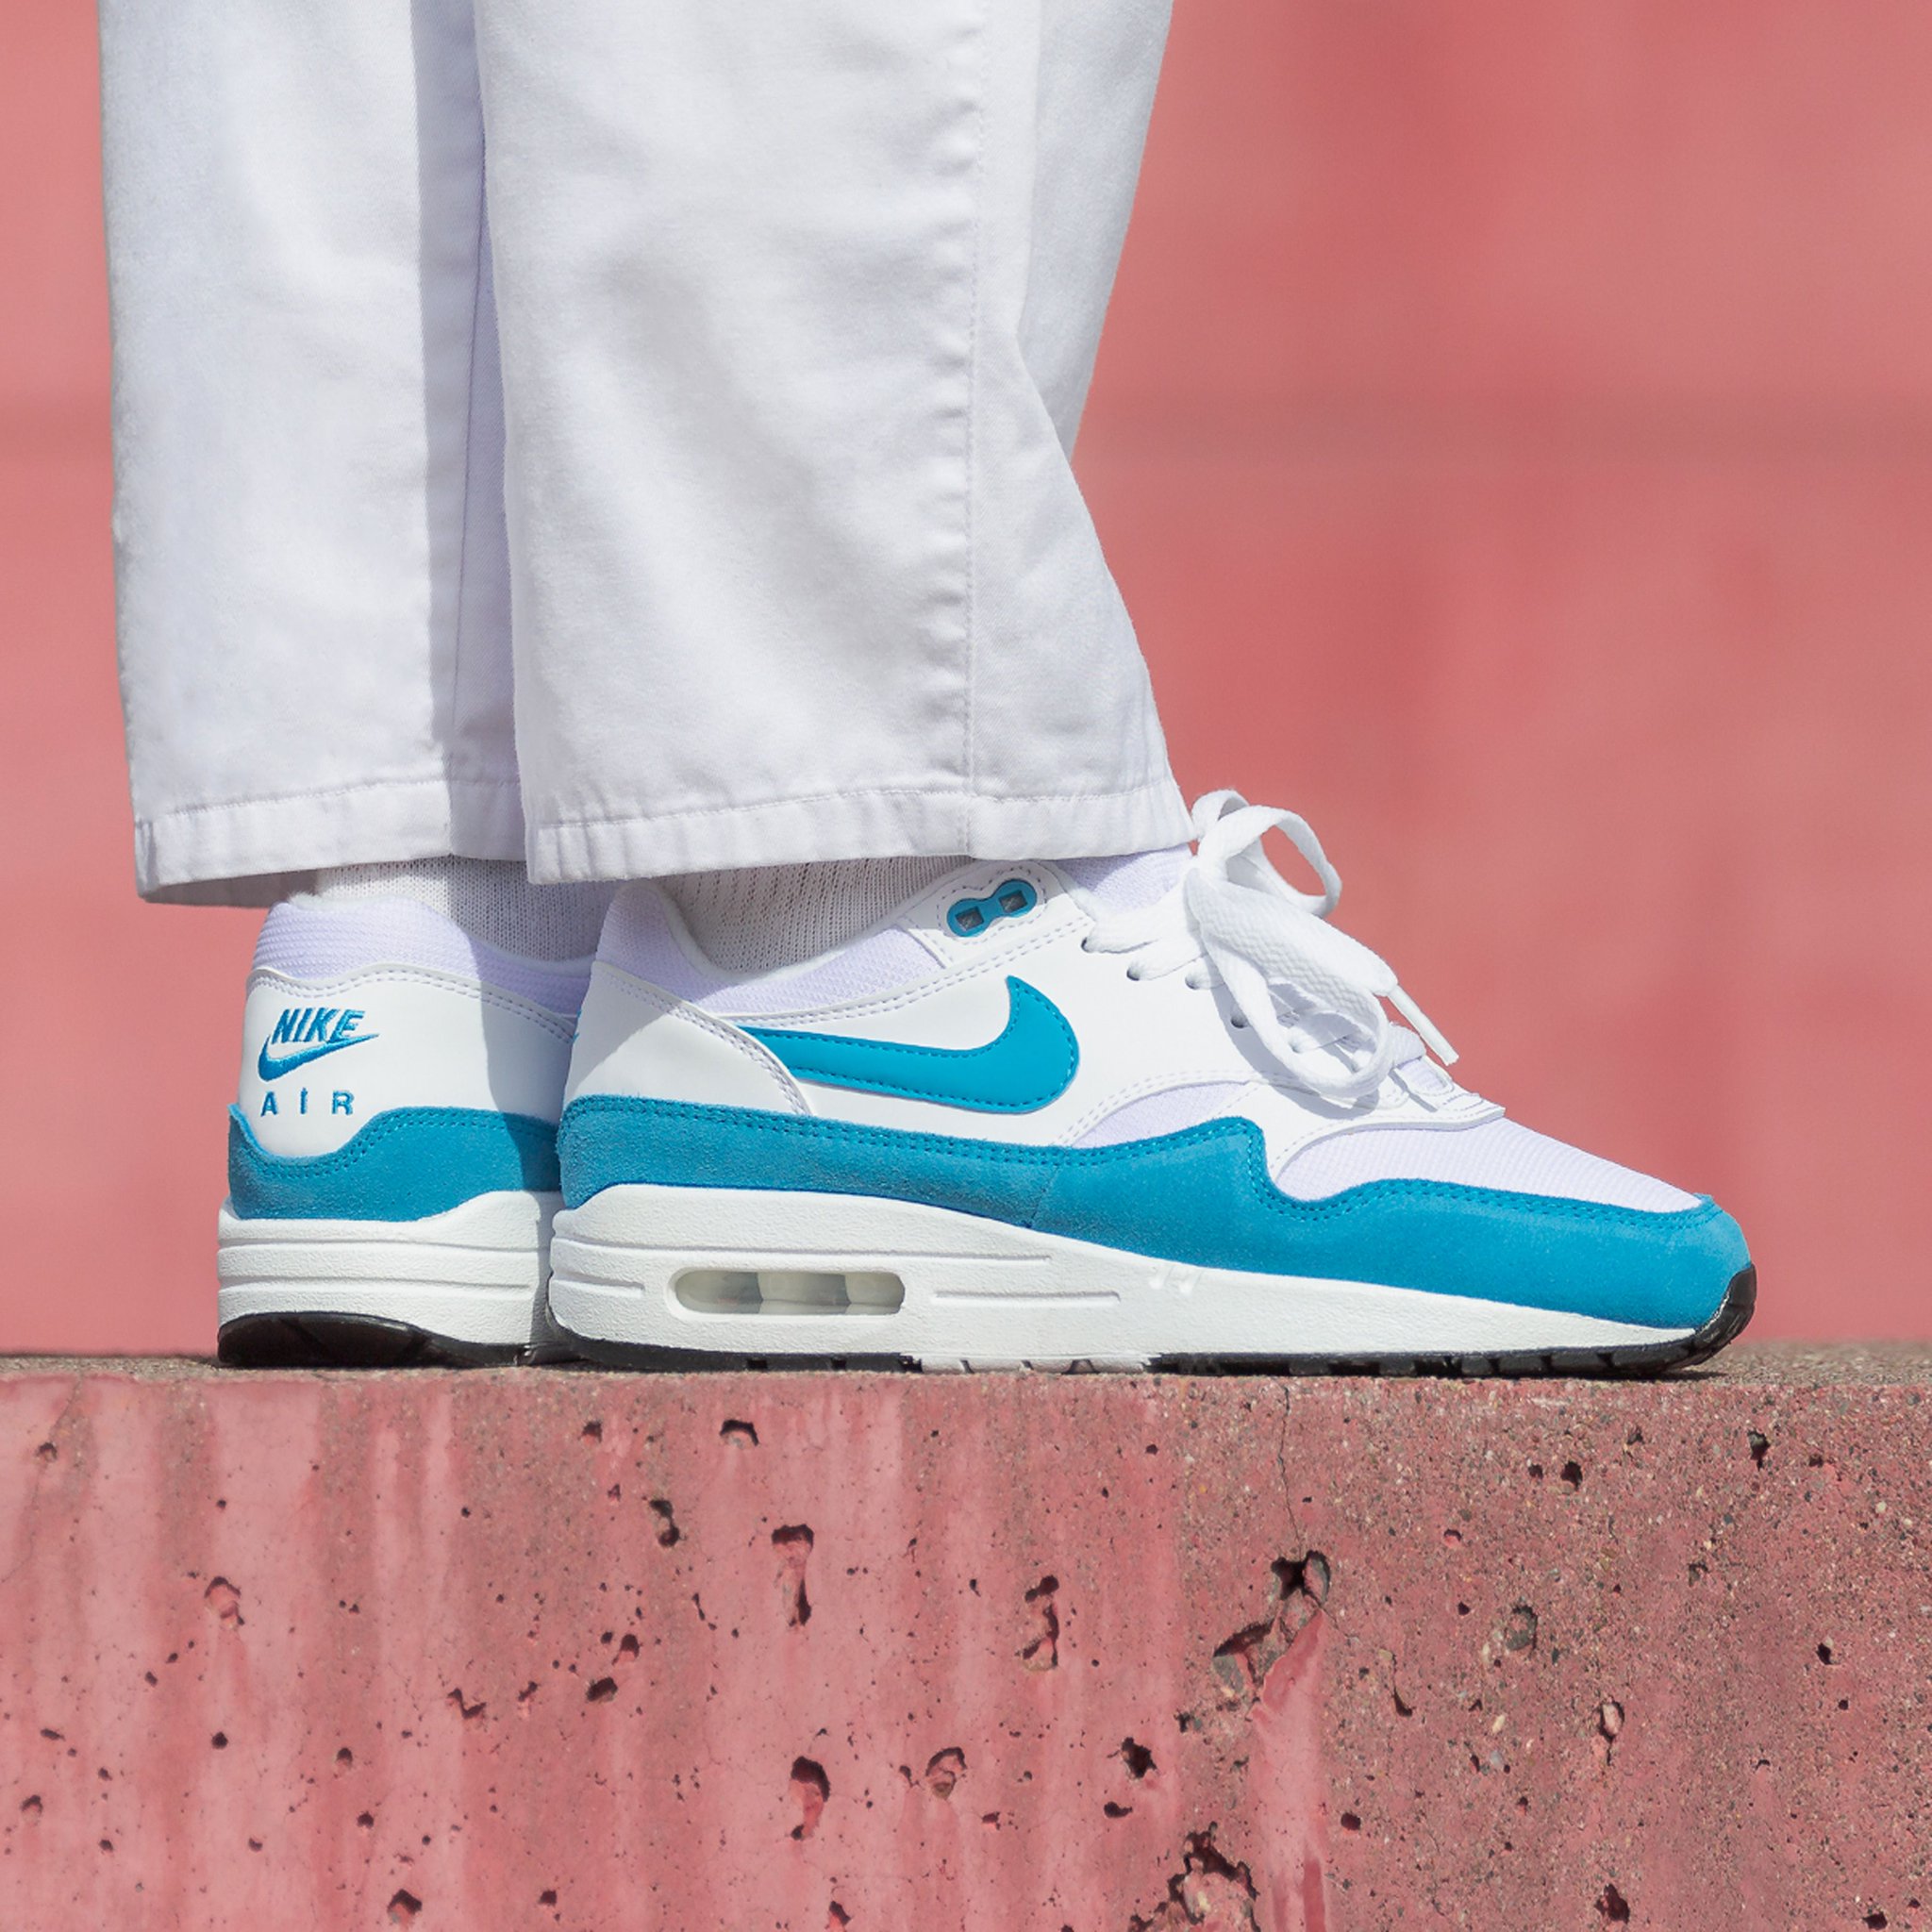 Desconocido articulo Gato de salto Titolo on Twitter: "stay classic with these Nike Wmns Air Max 1 in "Light  Blue Fury" 🔹 shop now ➡️ https://t.co/PhvonmXIiu US 3.5 (36) - US 9.5 (41)  style code 🔎 319986-117 #